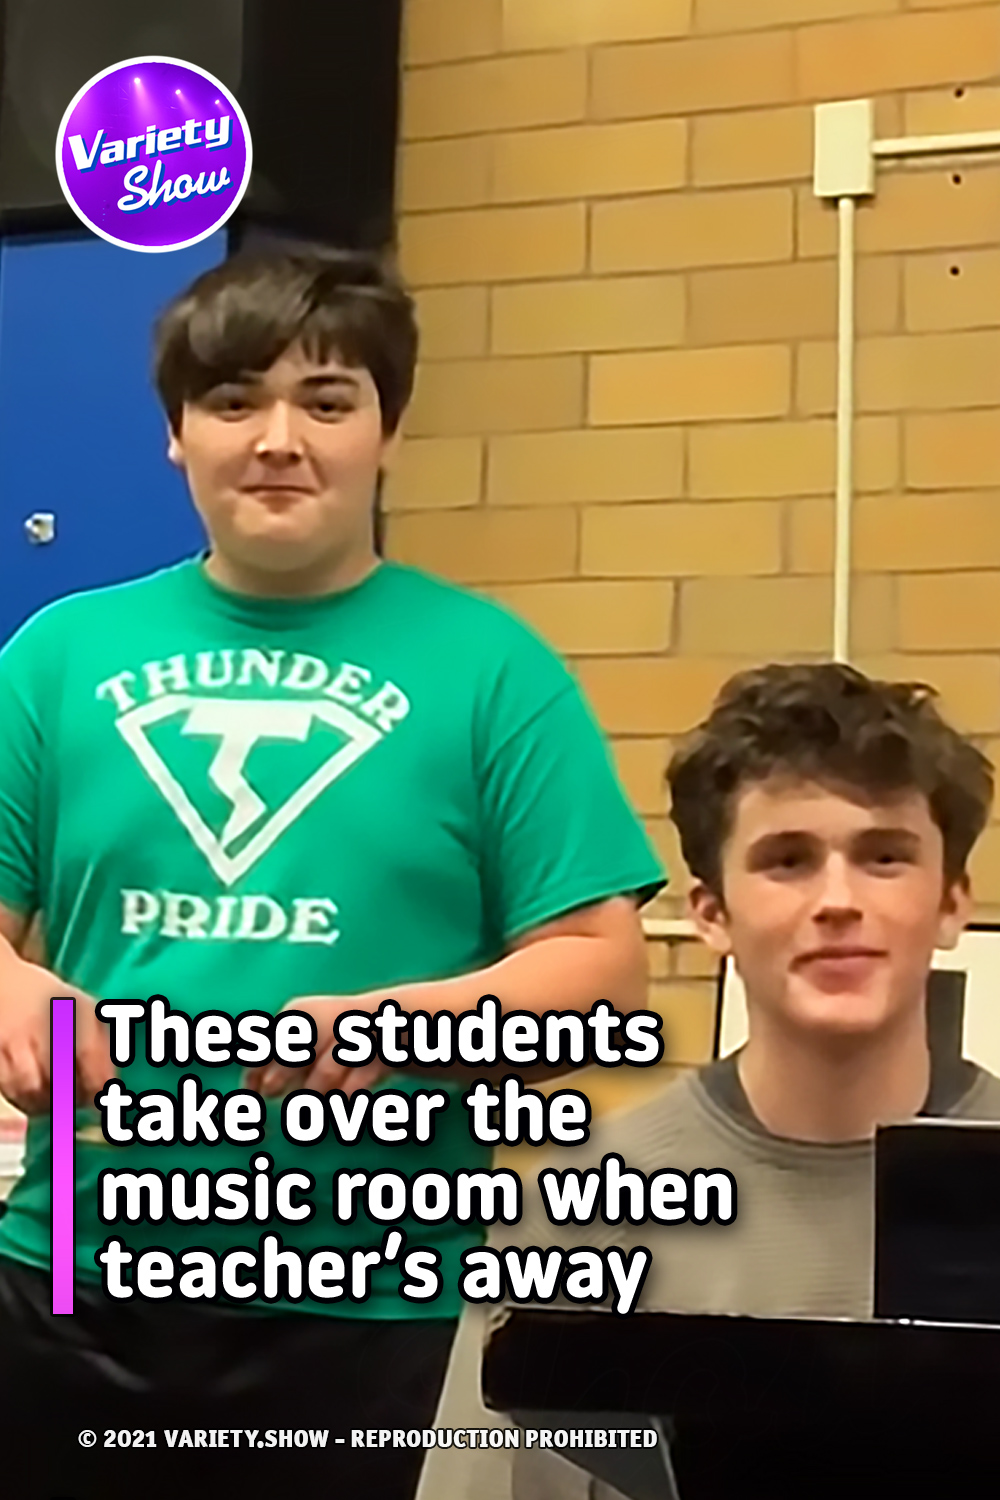 These students take over the music room when teacher’s away